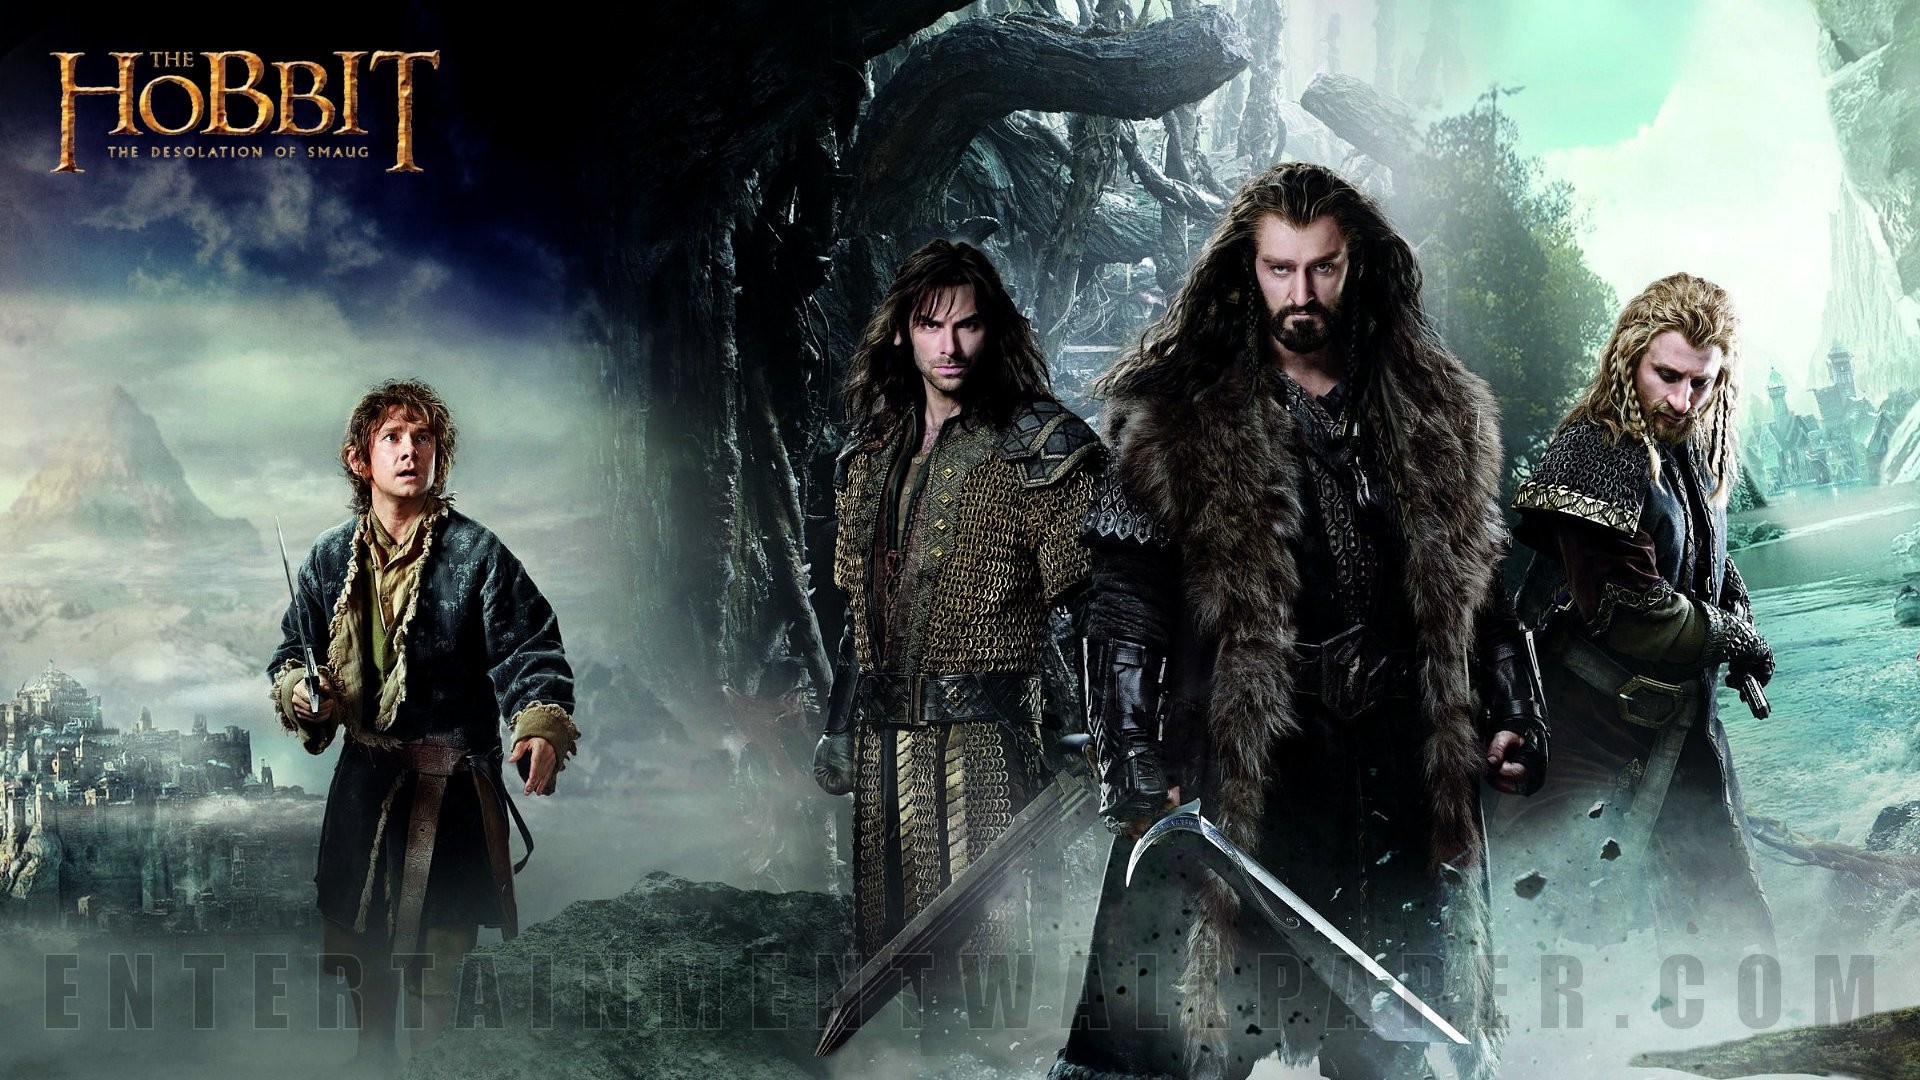 The Hobbit: The Desolation of Smaug Wallpaper – Original size, download now.